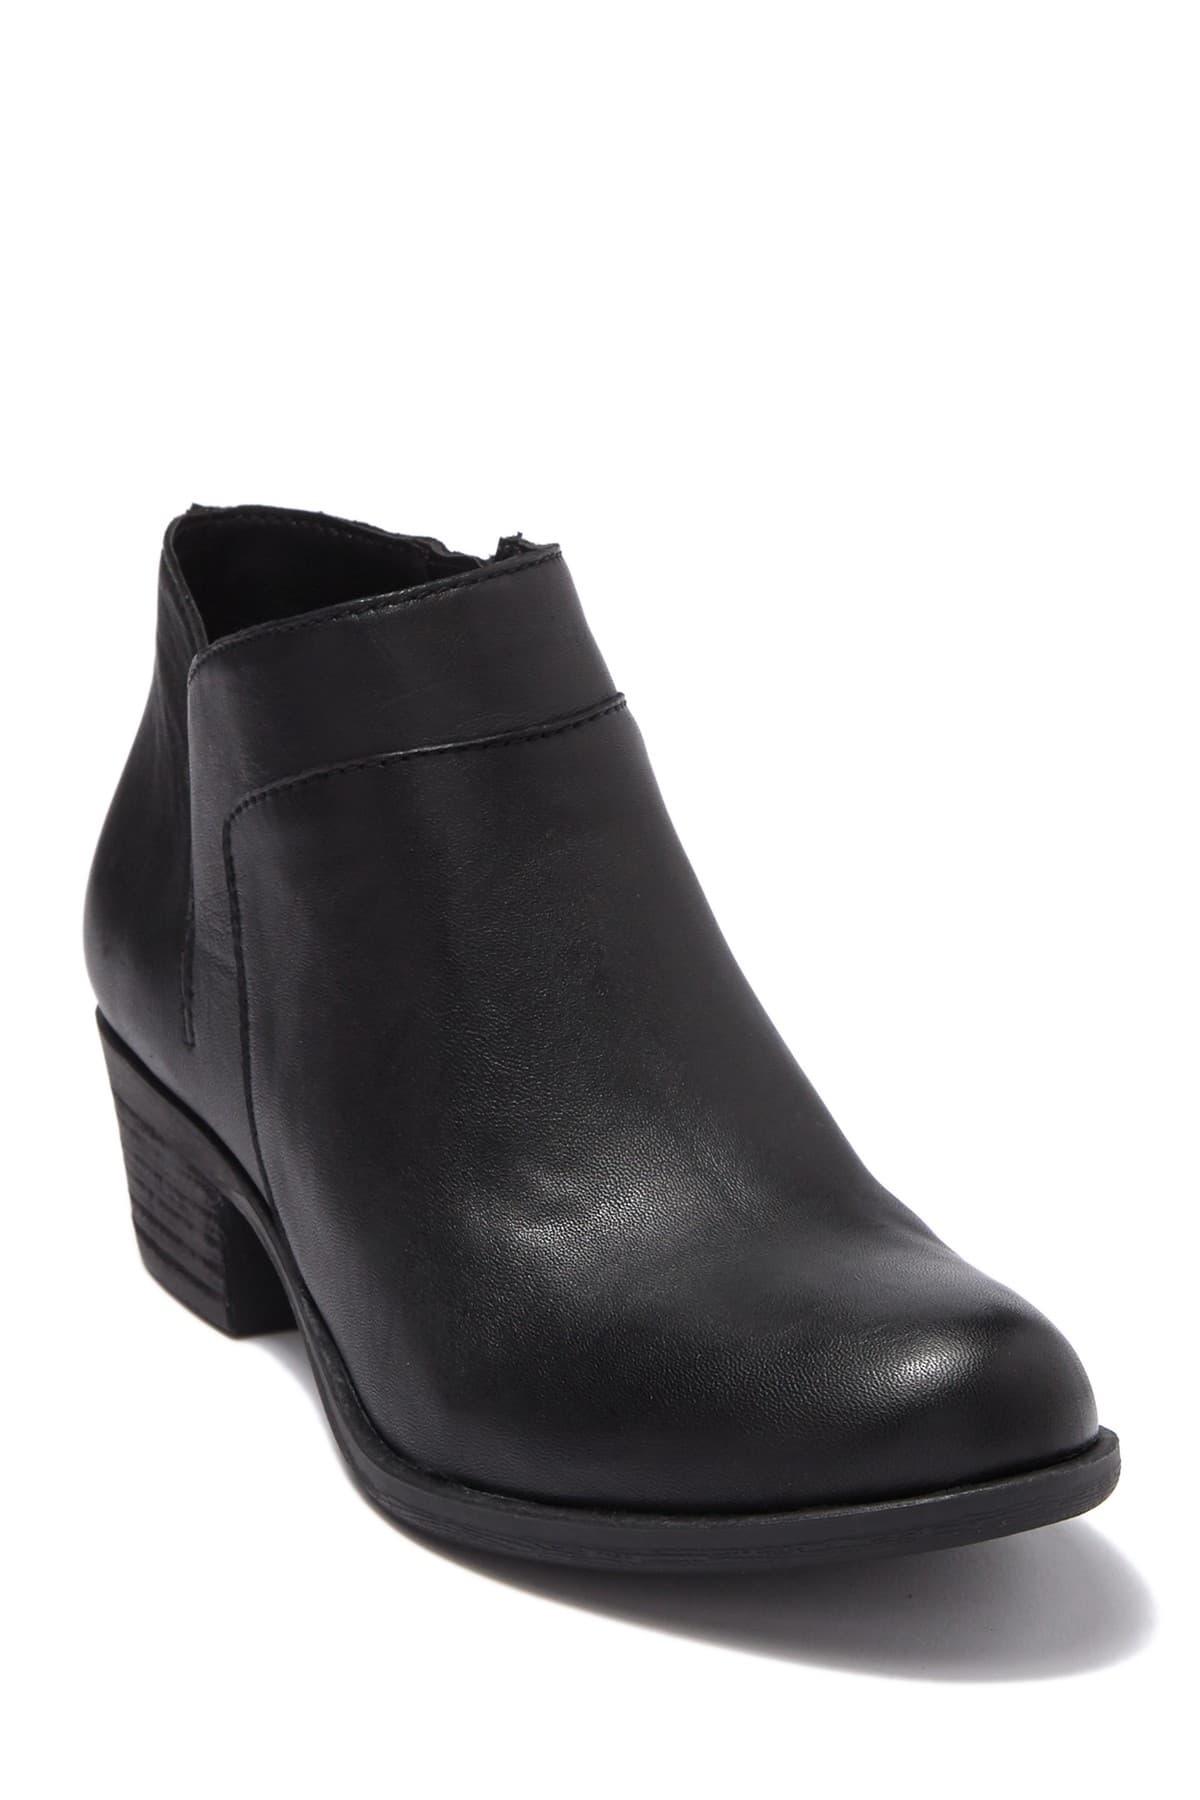 Lucky Brand Brintly Waterproof Ankle Boot in Black | Lyst